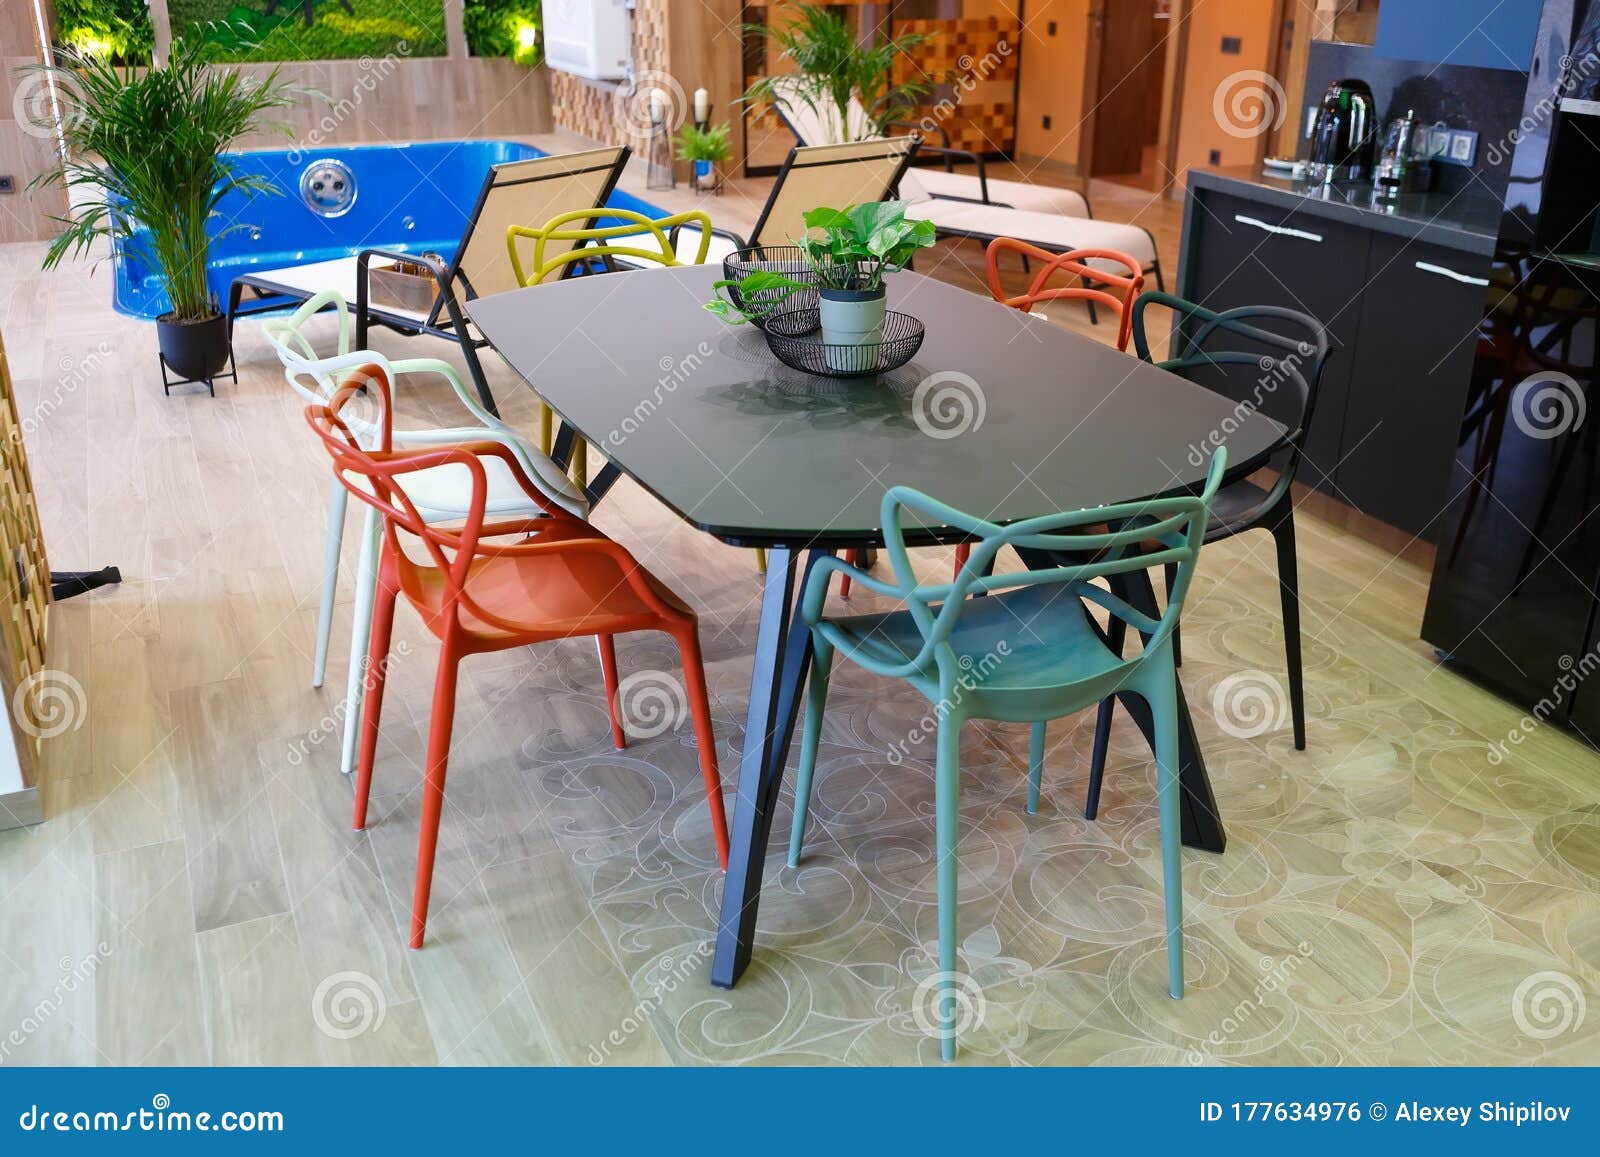 A Large Table In The Middle Of The Kitchen With Six Chairs Stock Photo Image Of Lifestyle Dining 177634976